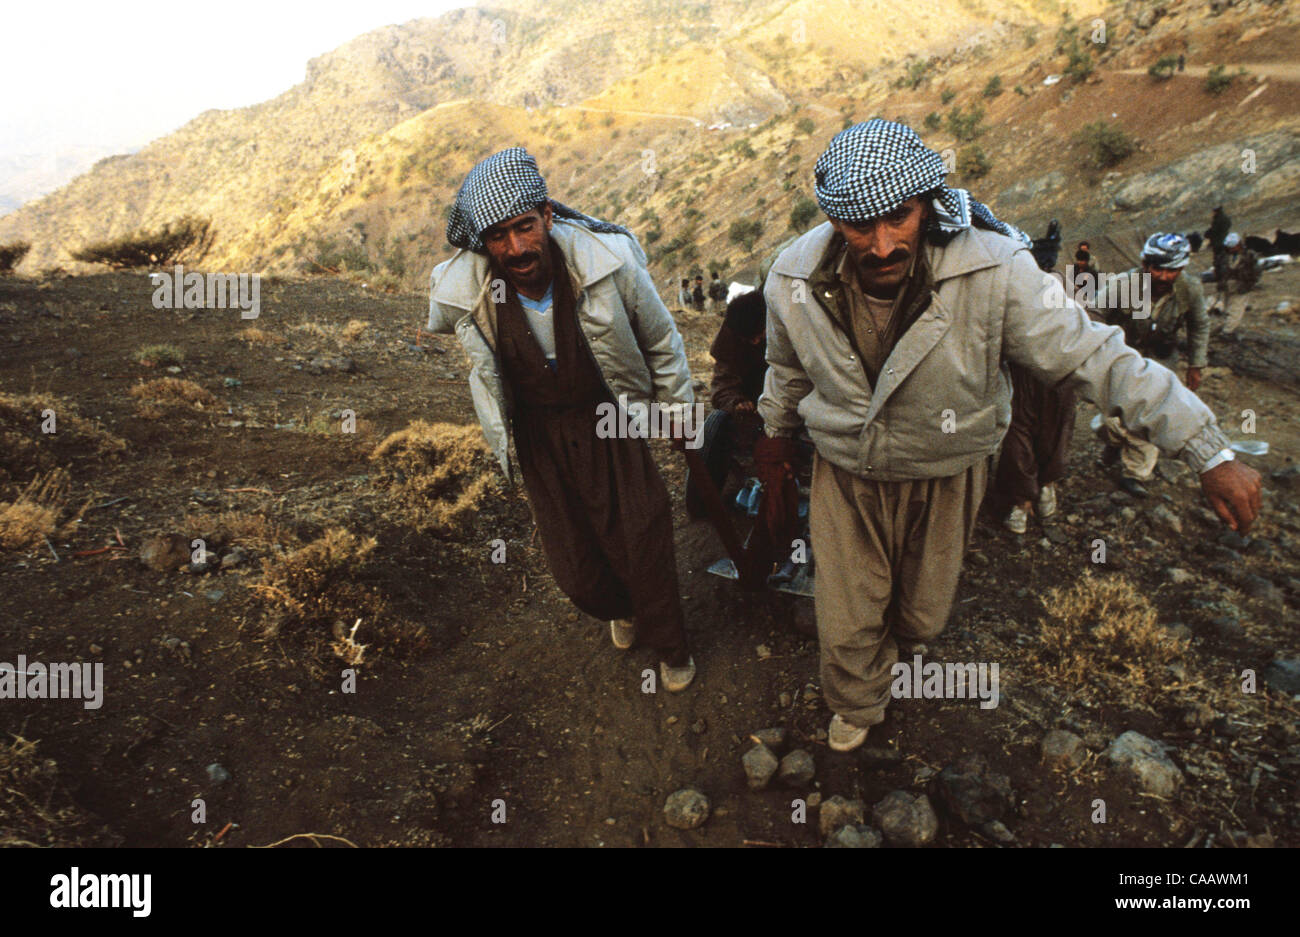 Nov 01, 1992; Kurdistan, IRAQ; Kurdish people in Northern Iraq. One of the 1991 Persian Gulf War's main consequences  was a mass exodus of almost the entire Kurdish population of northern Iraq toward the Iranian and Turkish borders. Those left behind suffered poverty and  hardship. Stock Photo